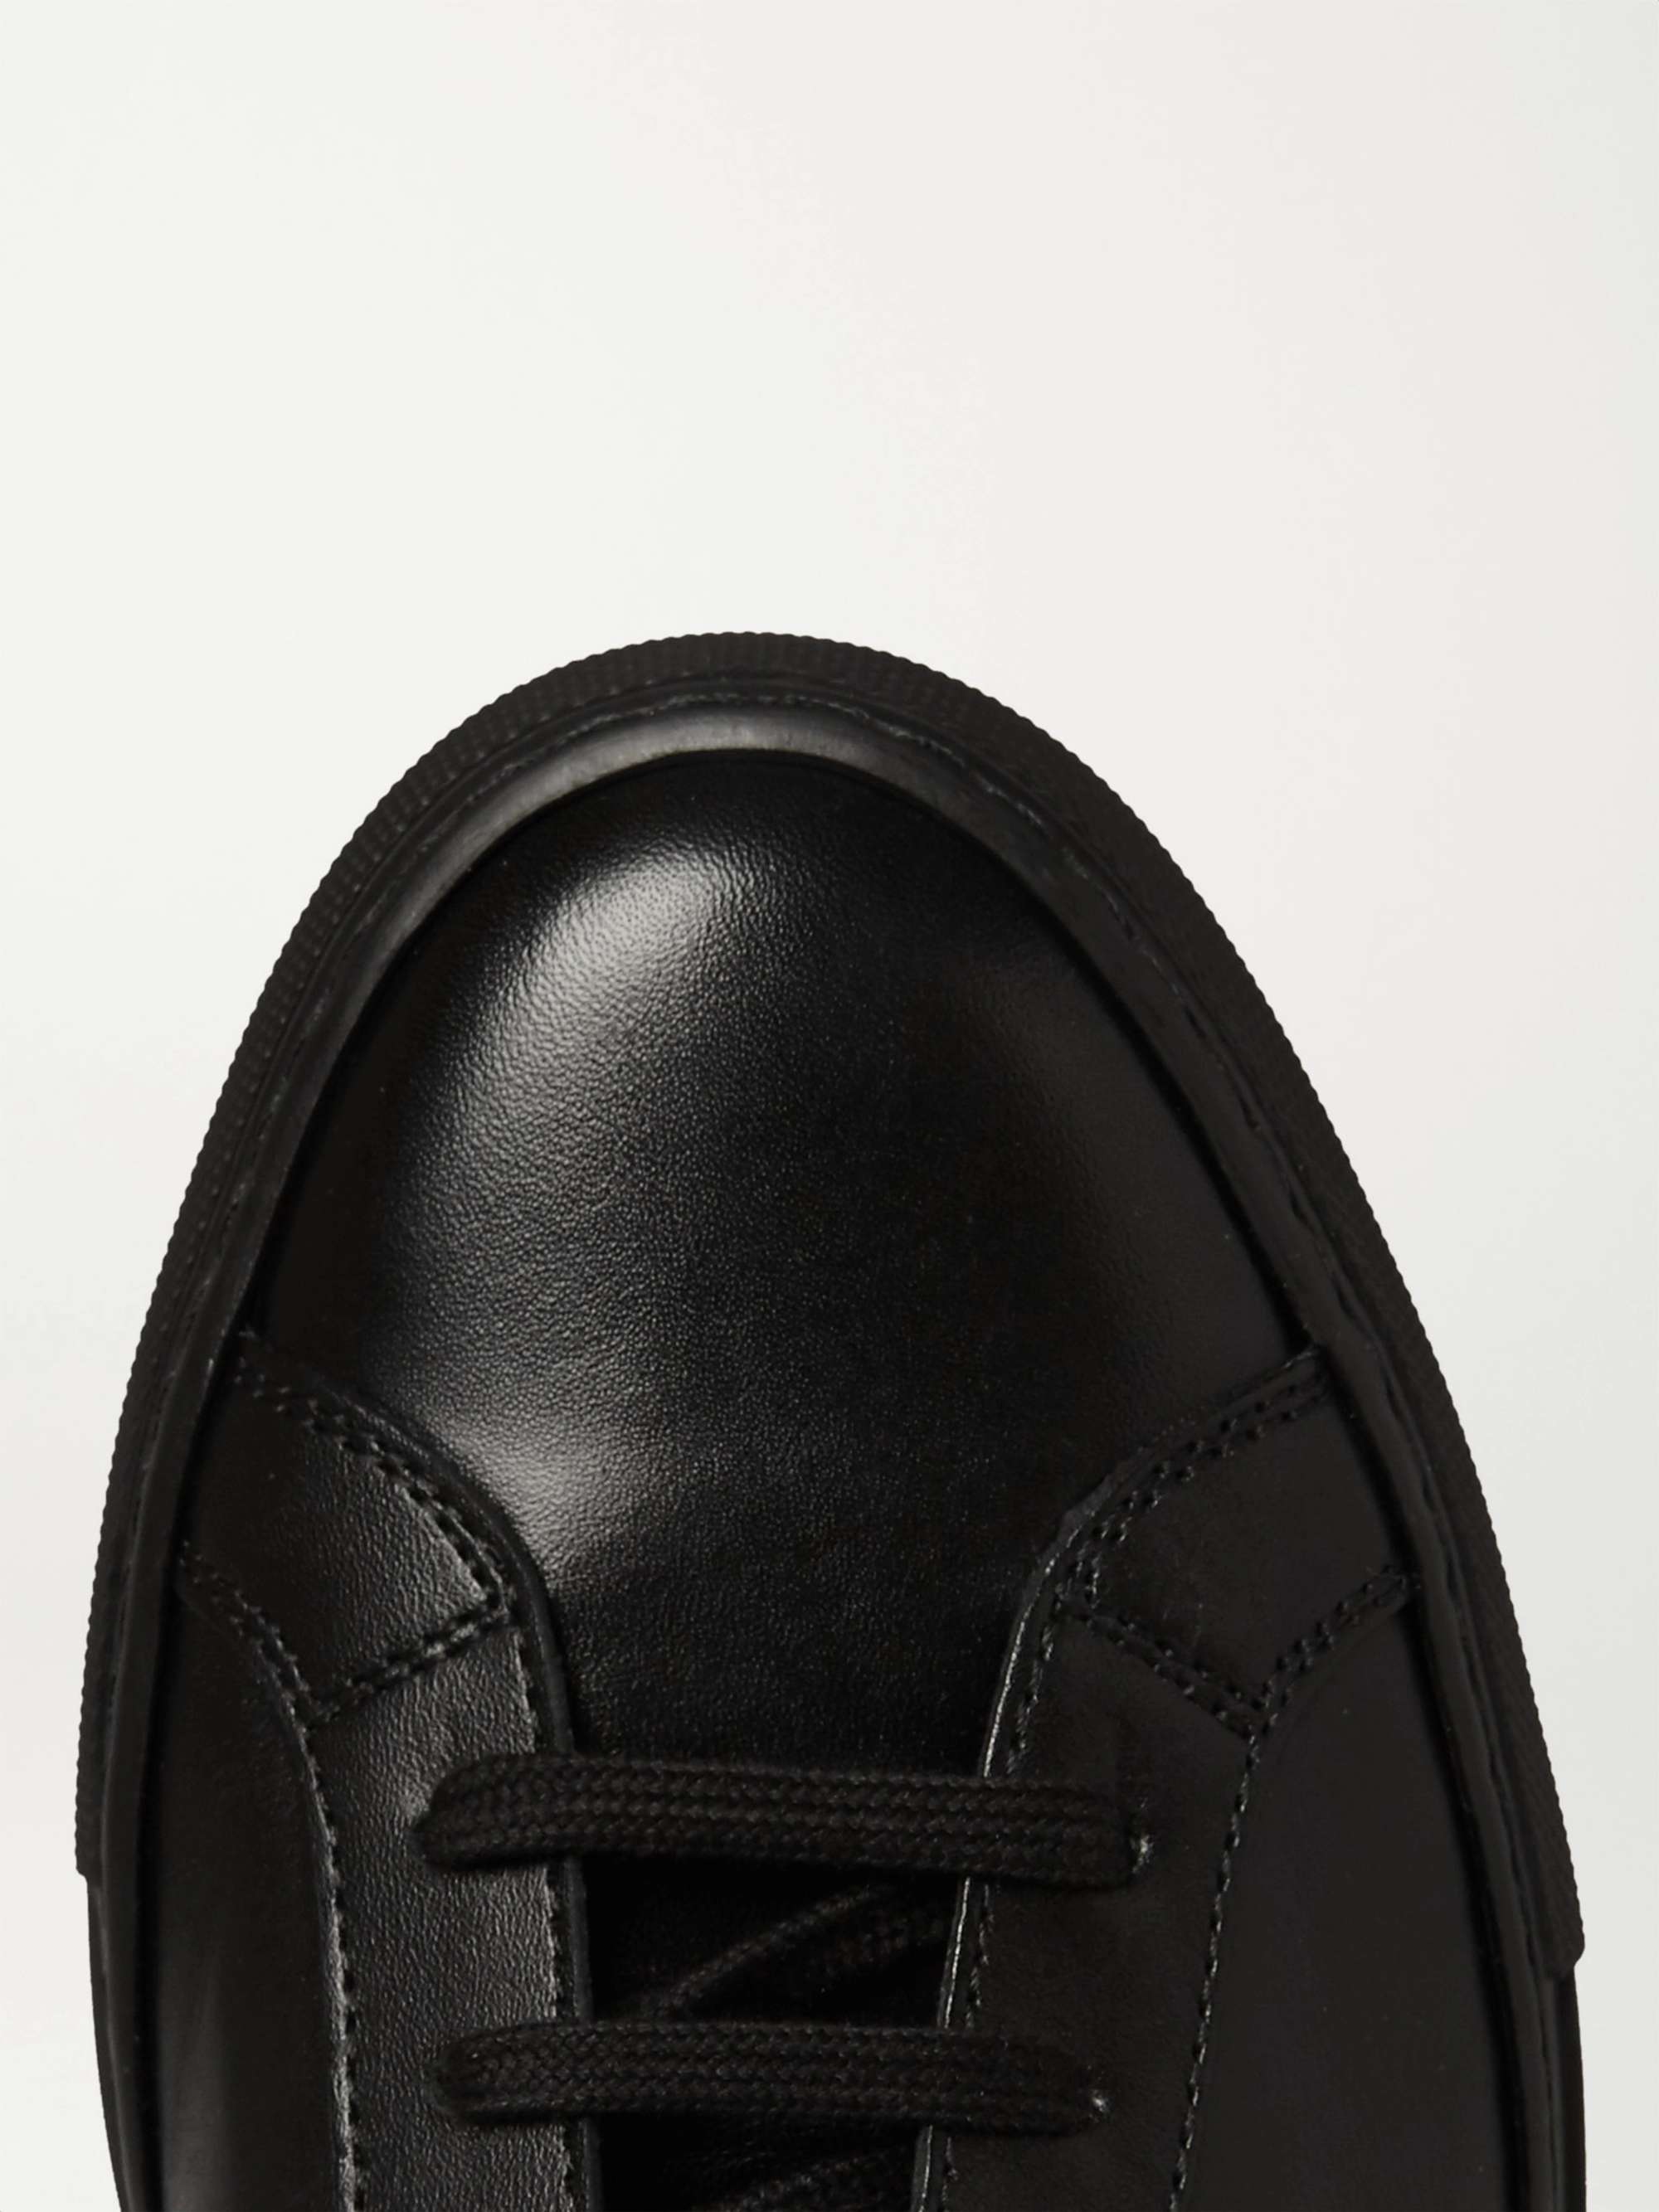 Black Original Achilles Leather High-Top Sneakers | COMMON PROJECTS | MR  PORTER